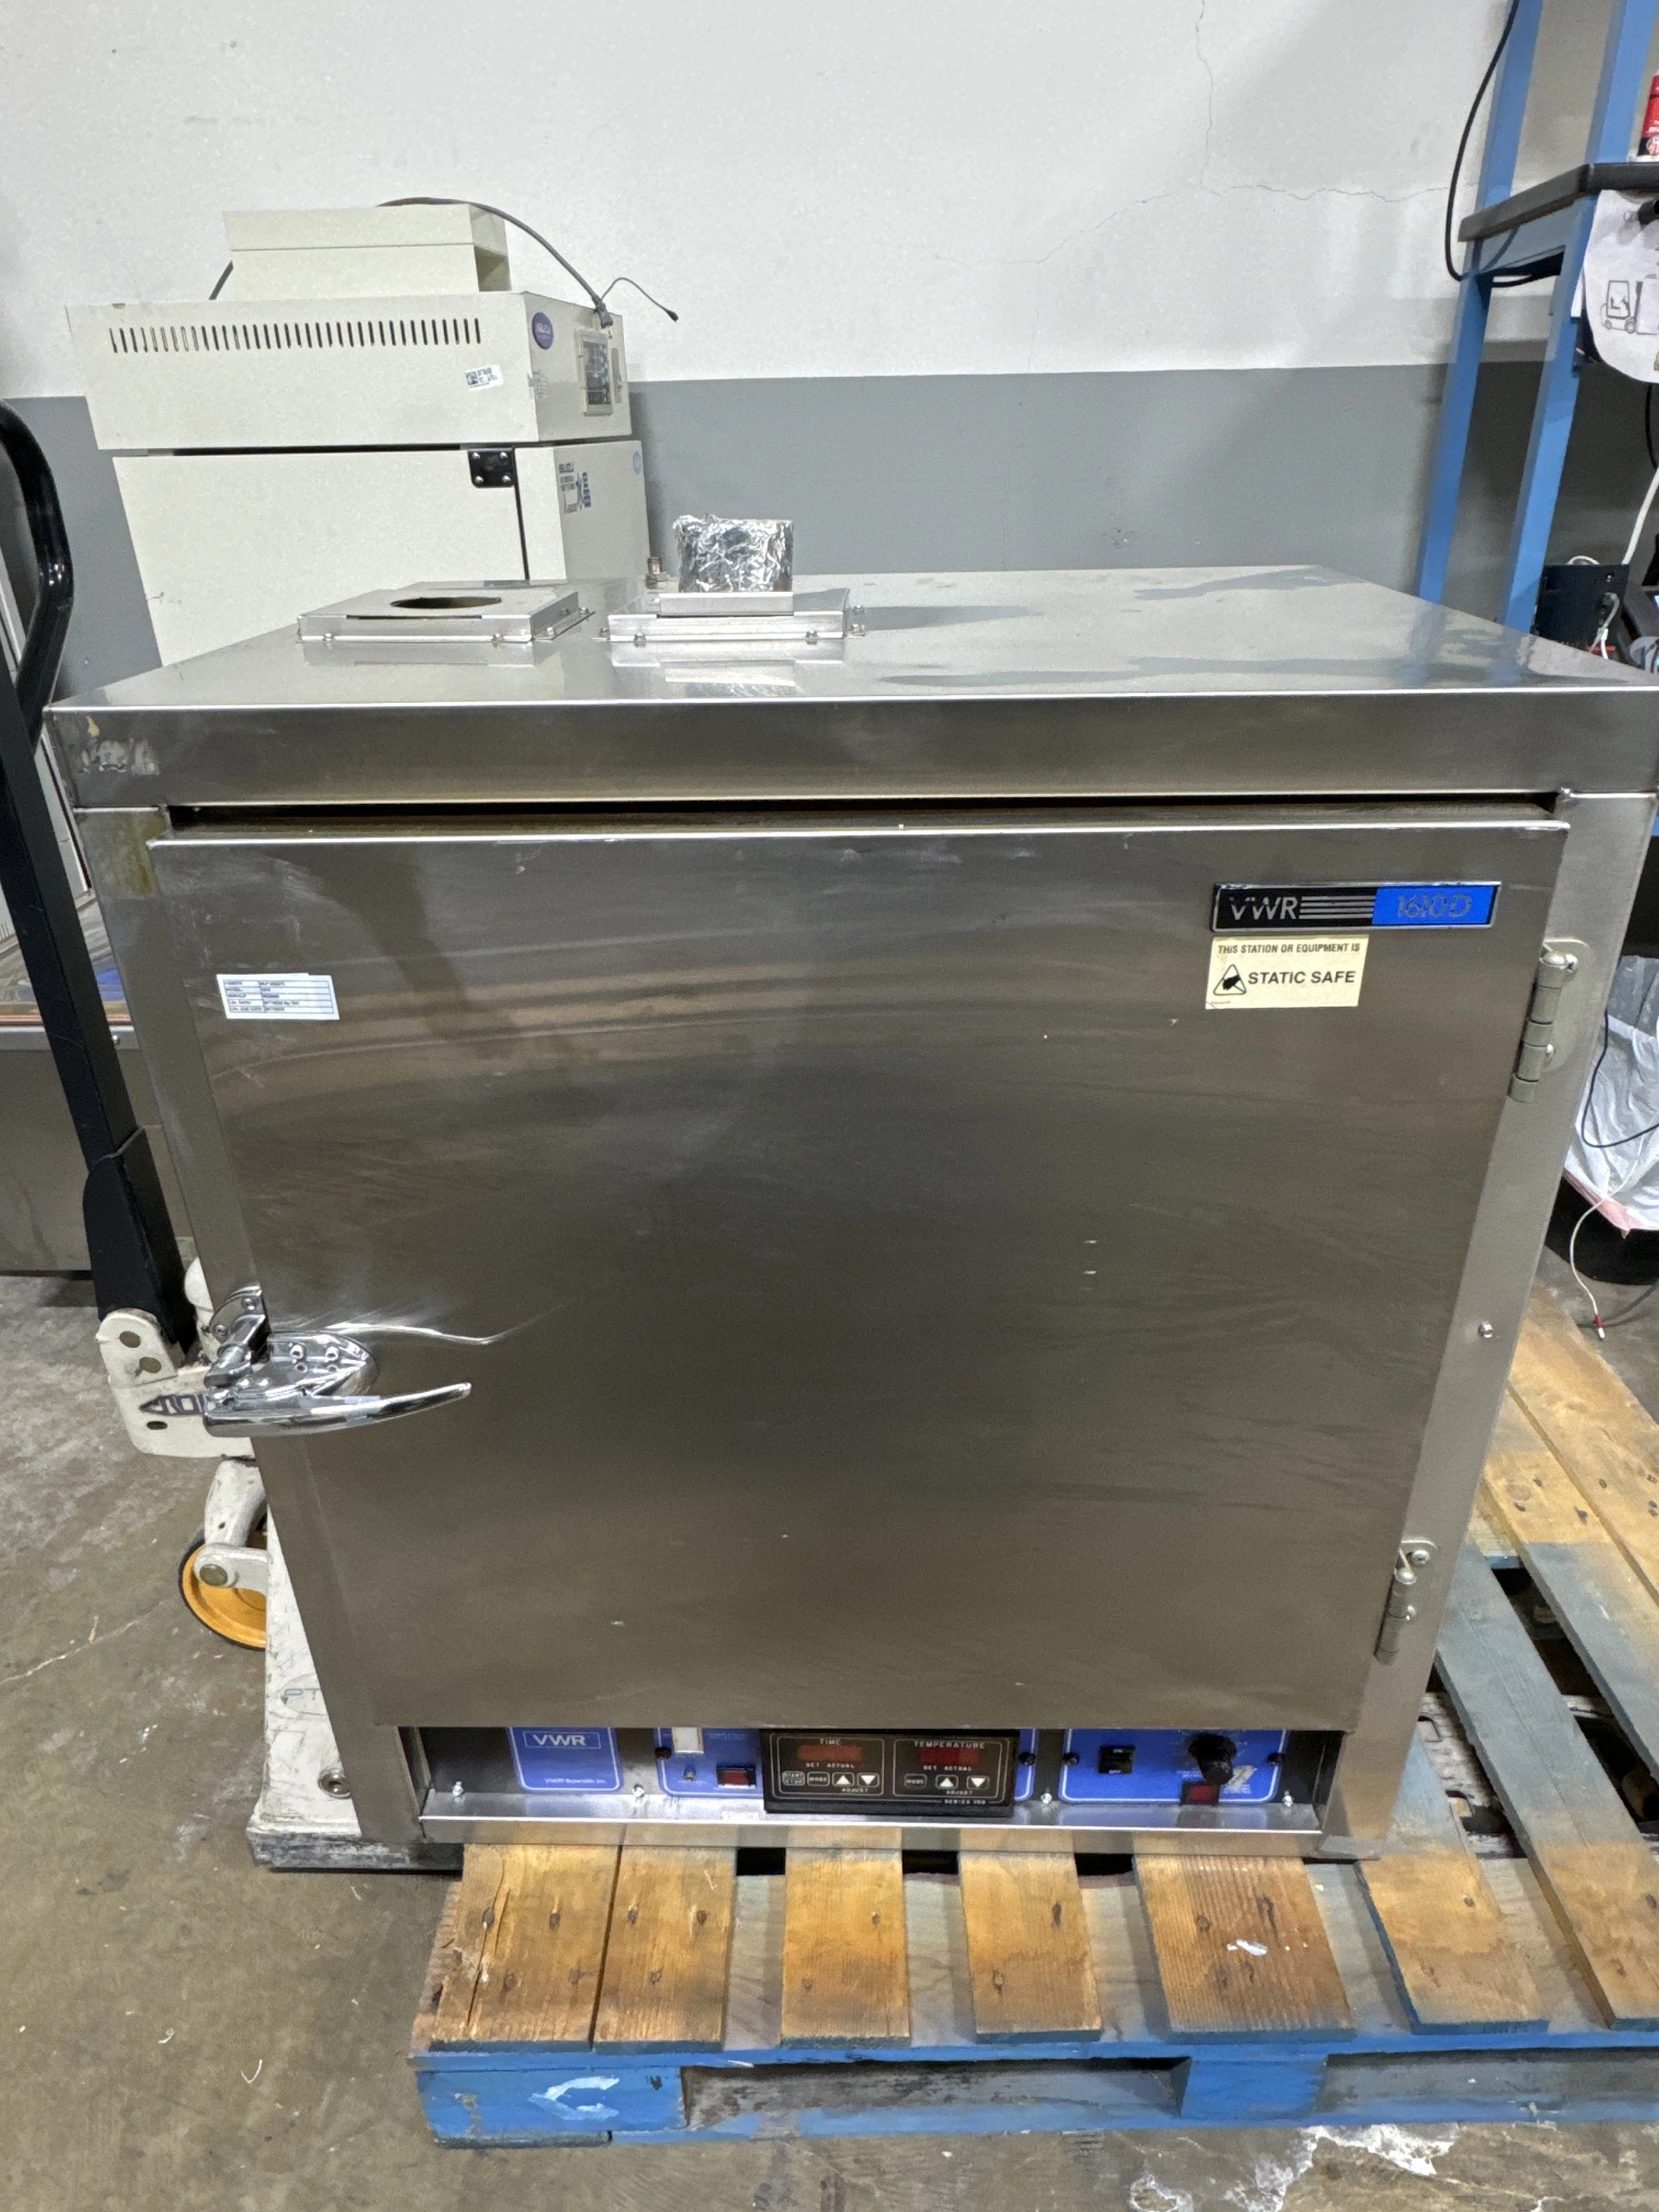 VWR 1610D Laboratory Oven for Clean Room